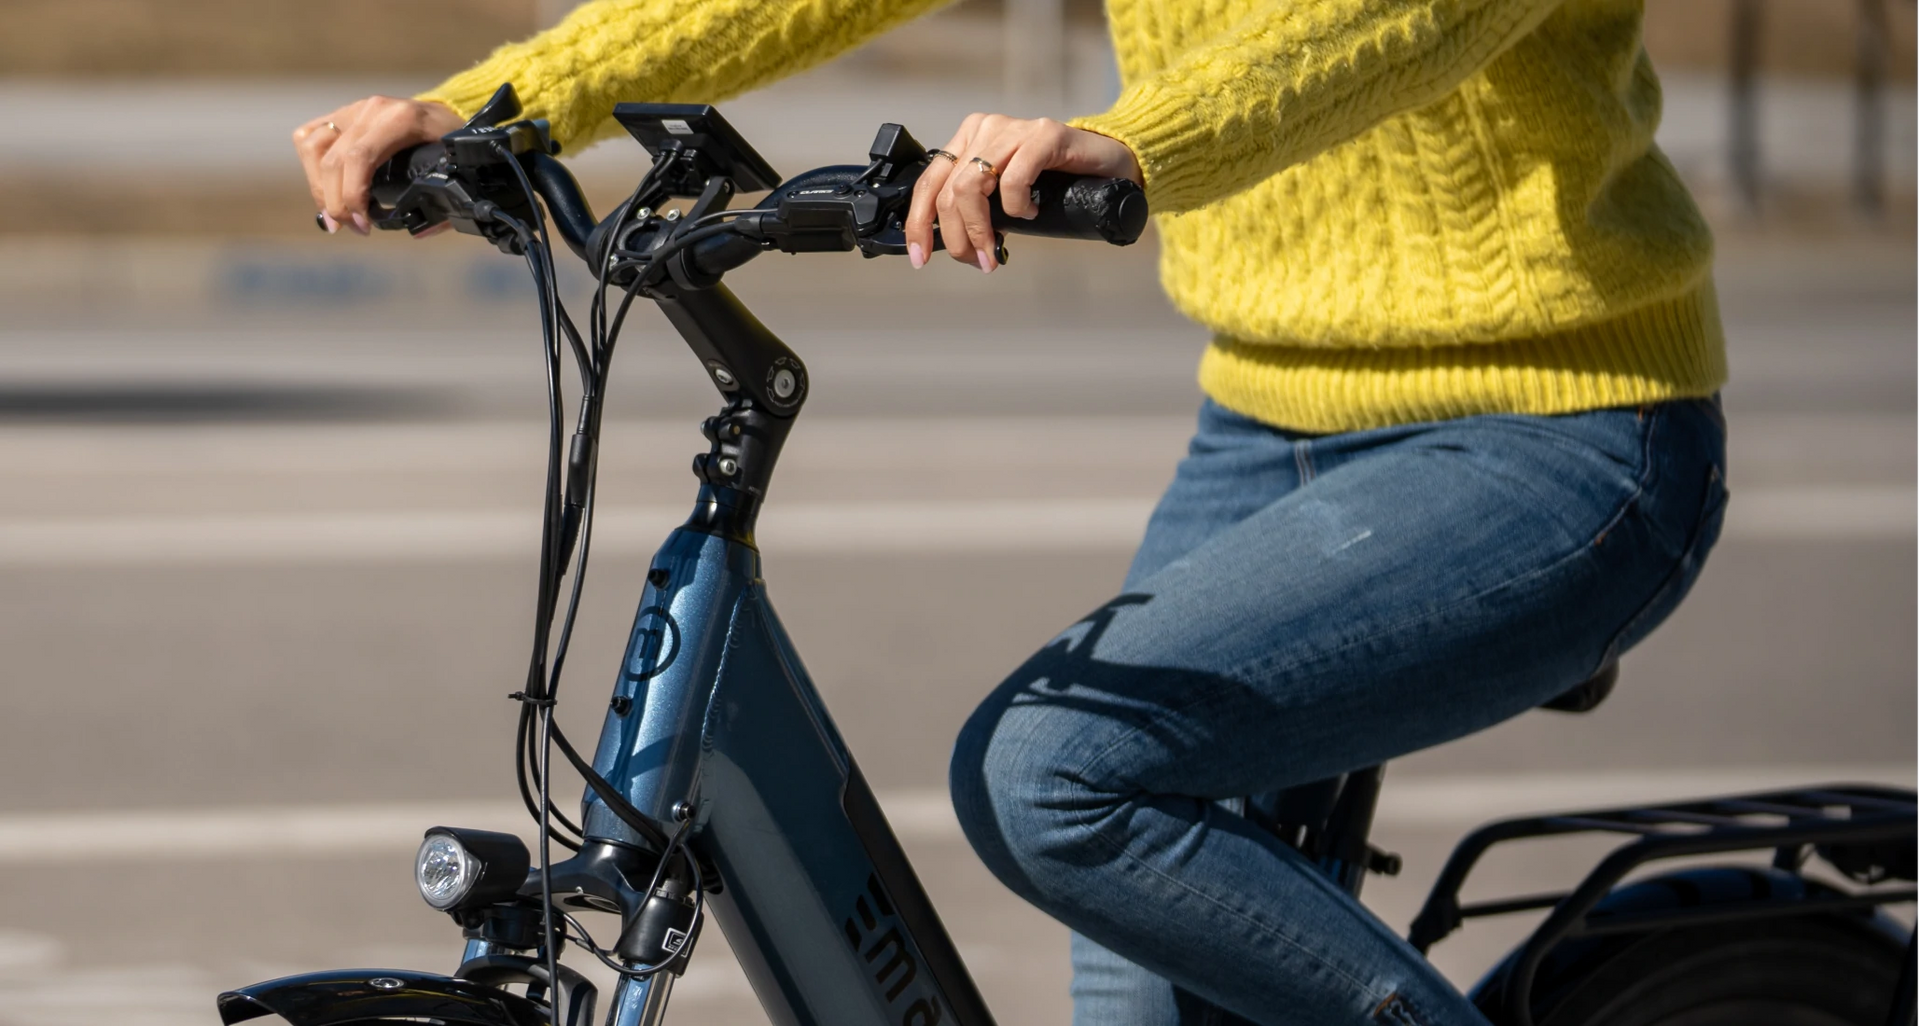 Pi-POP is battery-less e-bike which runs on rider's pedaling power